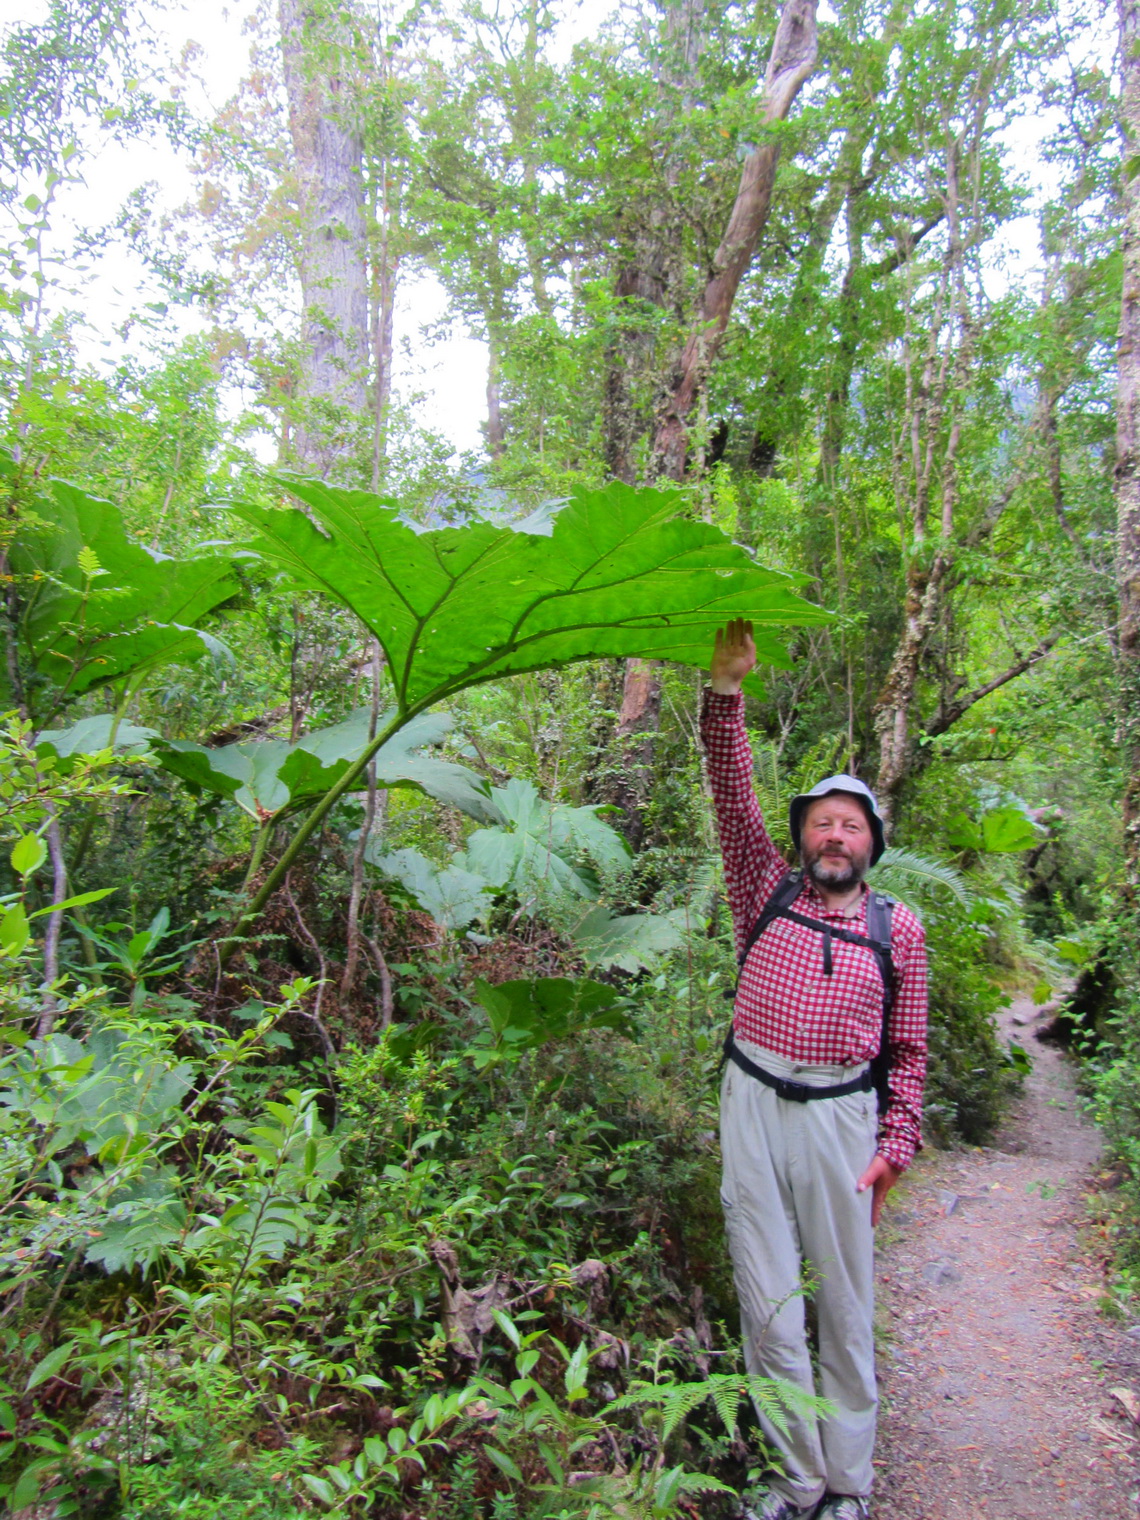 Huge Pangue plant which is similar to rhubarb on the way to the Mirador Ventisquero Colgante